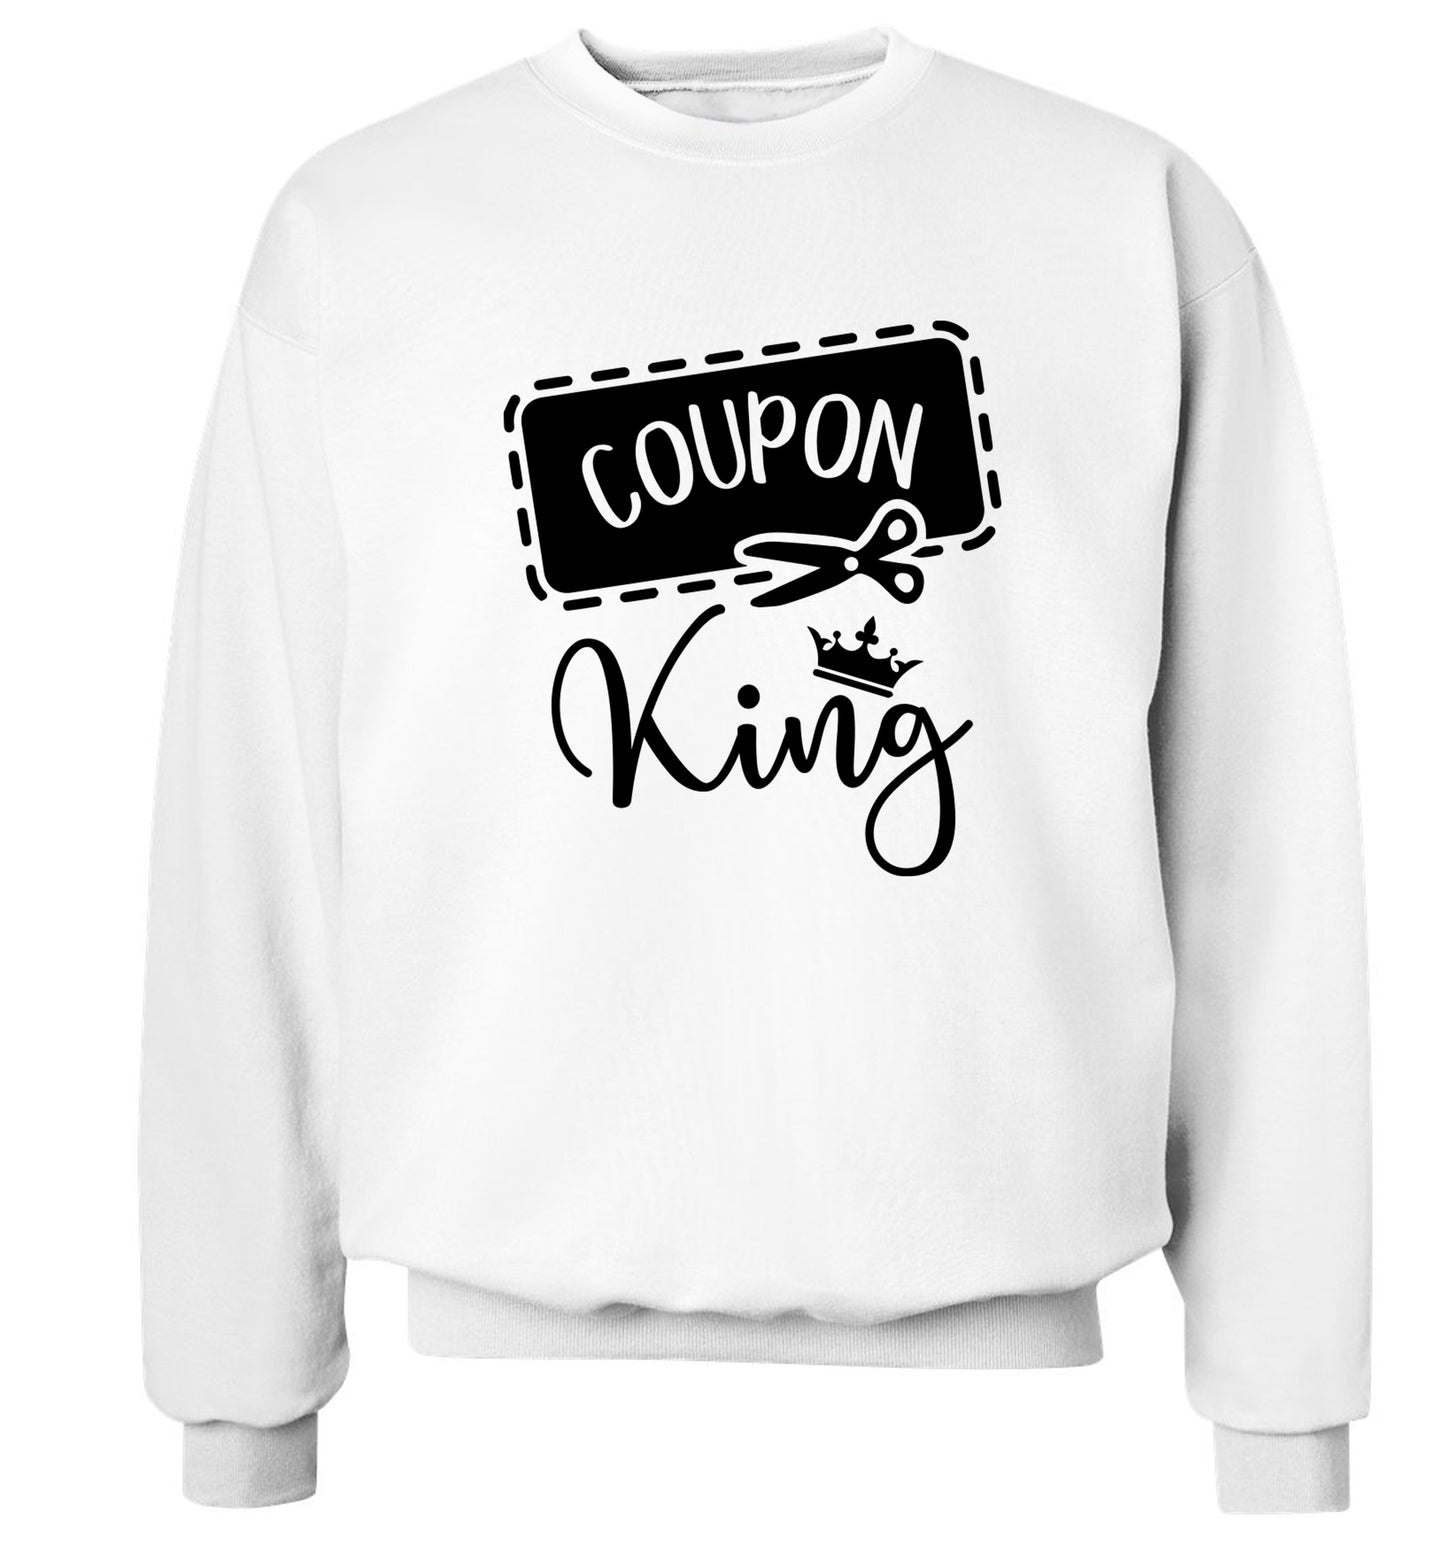 Coupon King Adult's unisex white Sweater 2XL